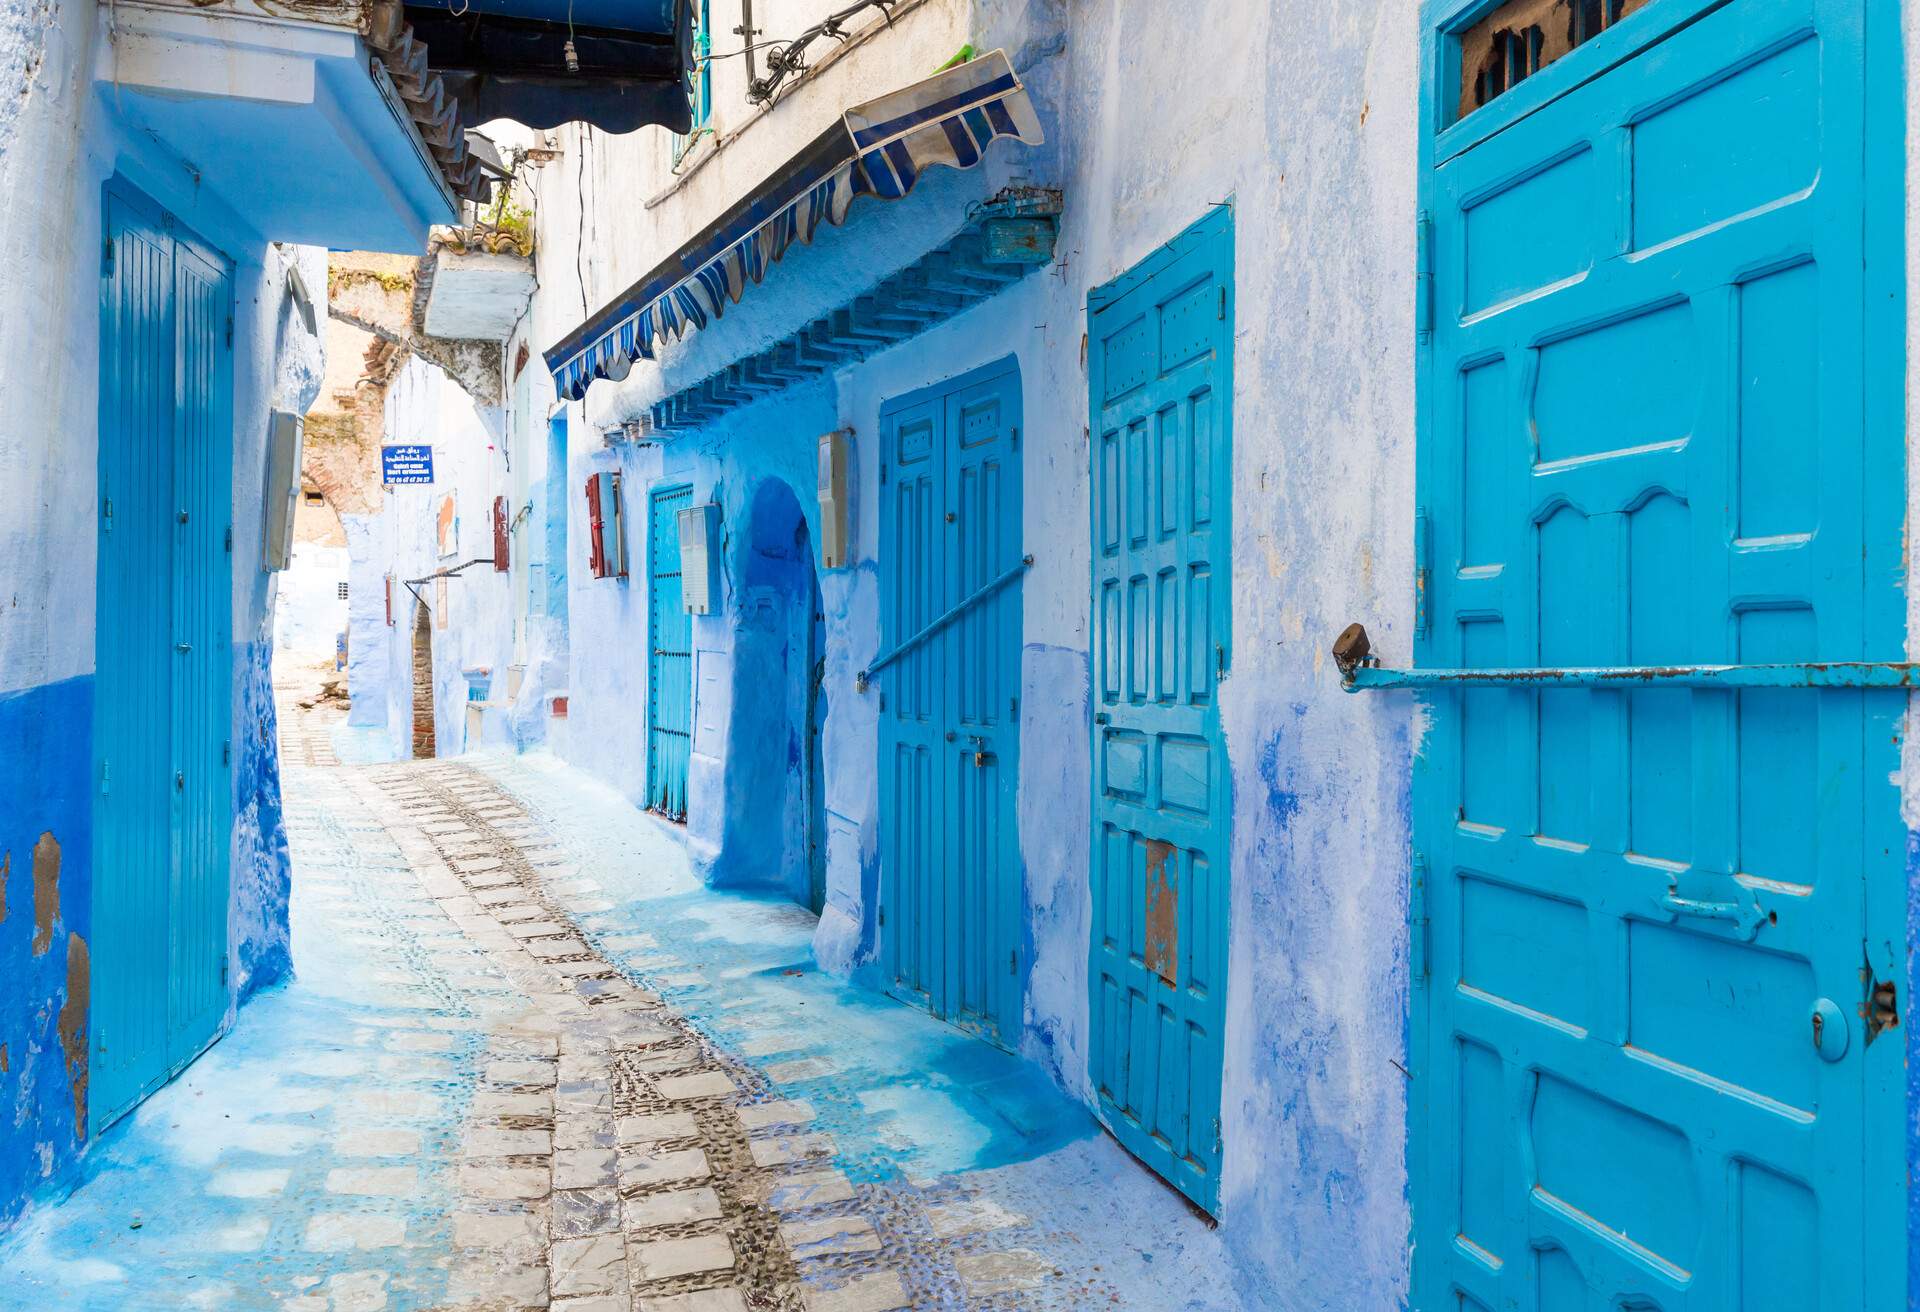 A cobbled alleyway in the middle of compact blue-washed houses.